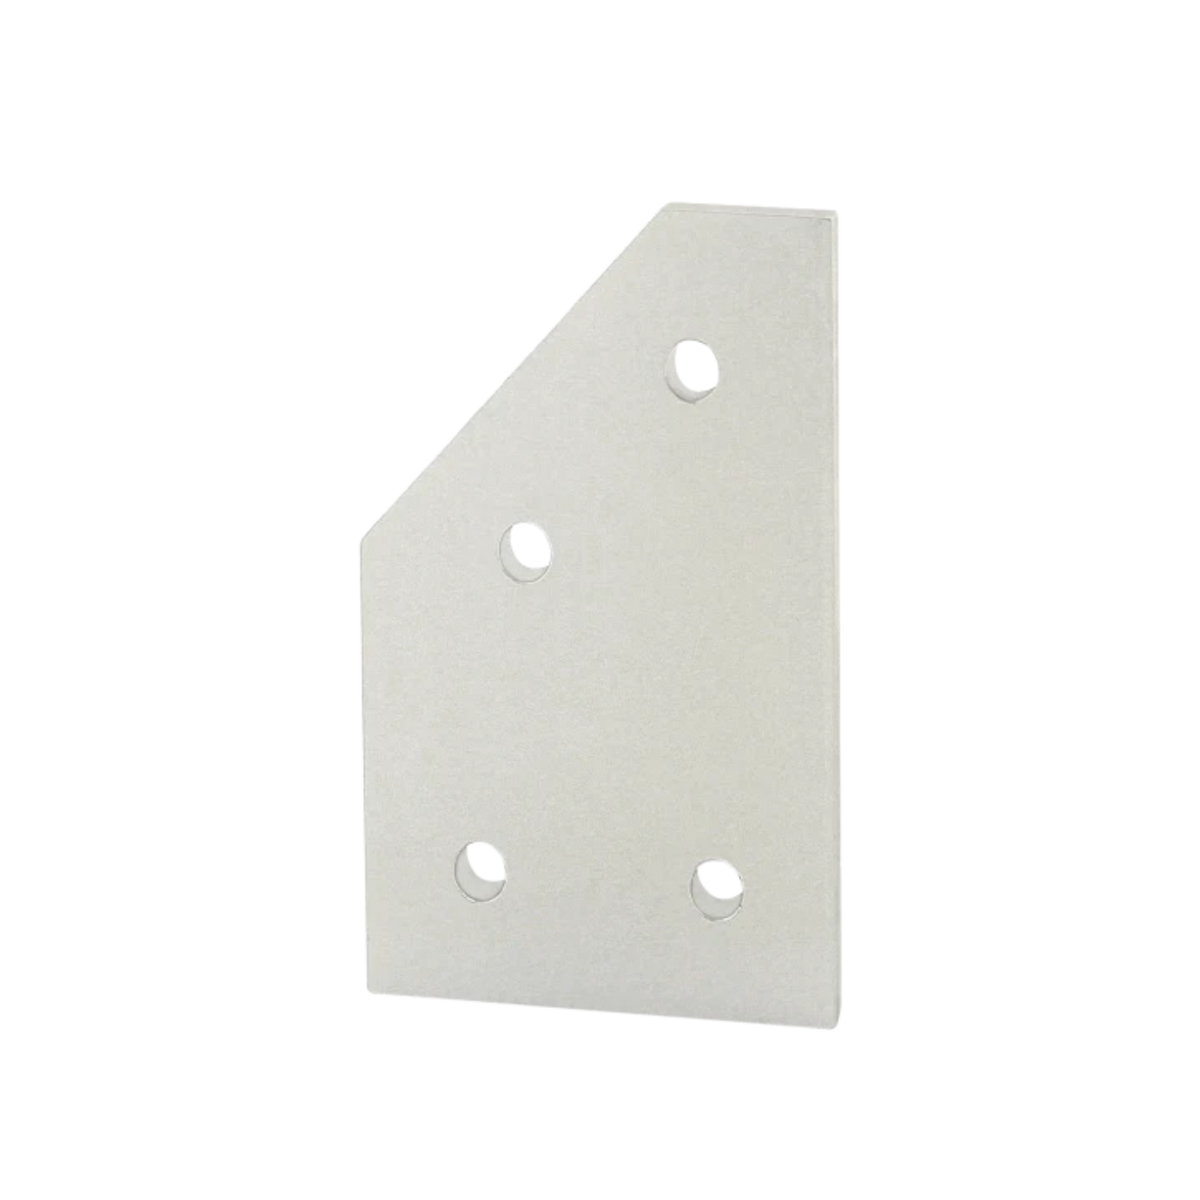 white rectangular flat plate with an angled corner on the top left and four mounting holes